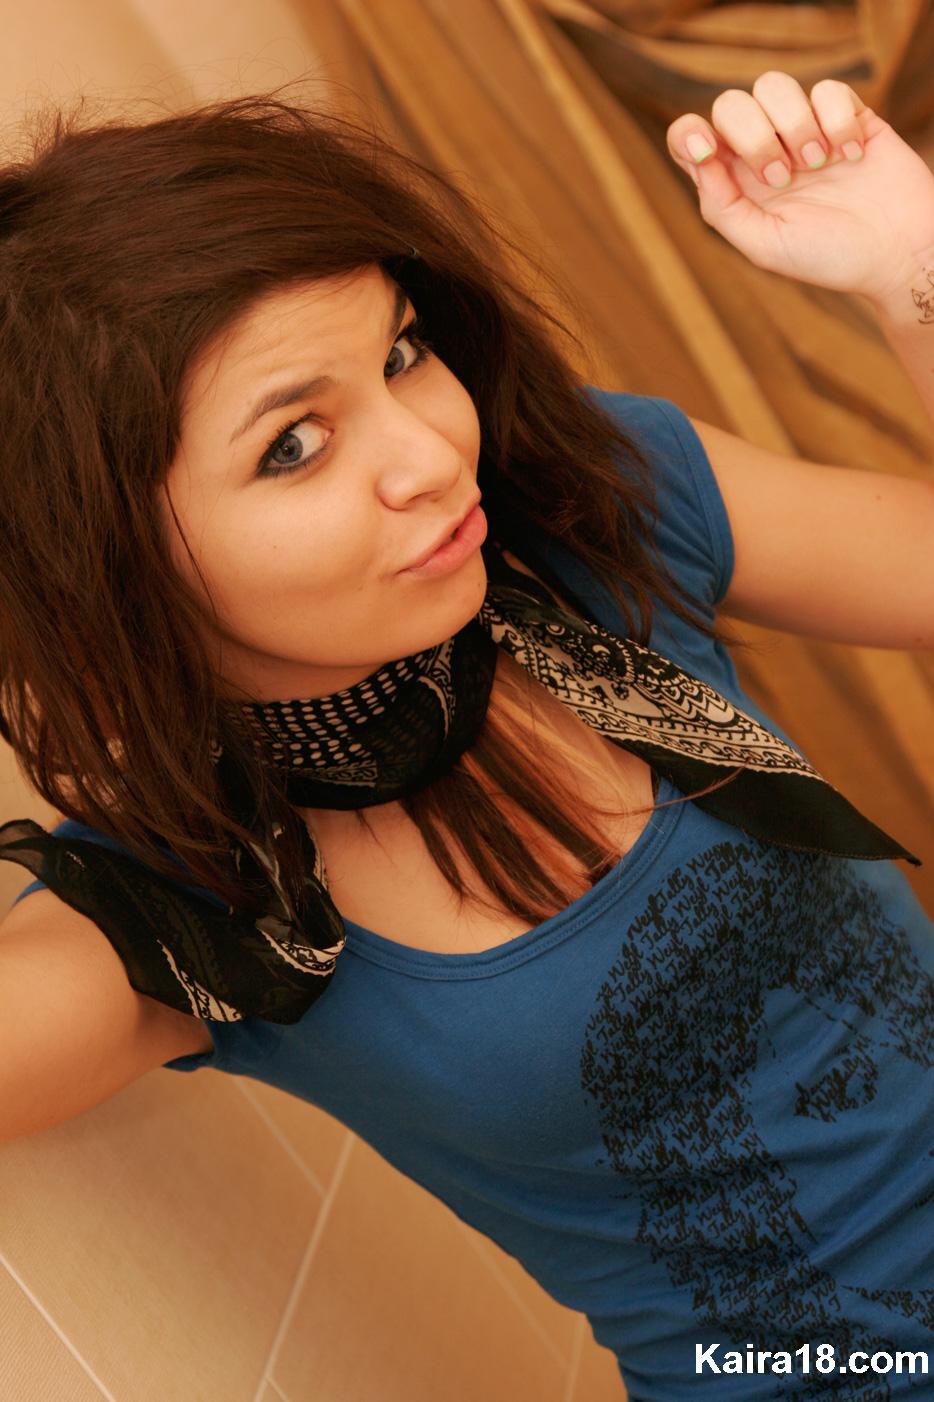 Pictures of teen model Kaira 18 teasing with her pretty face #55897204